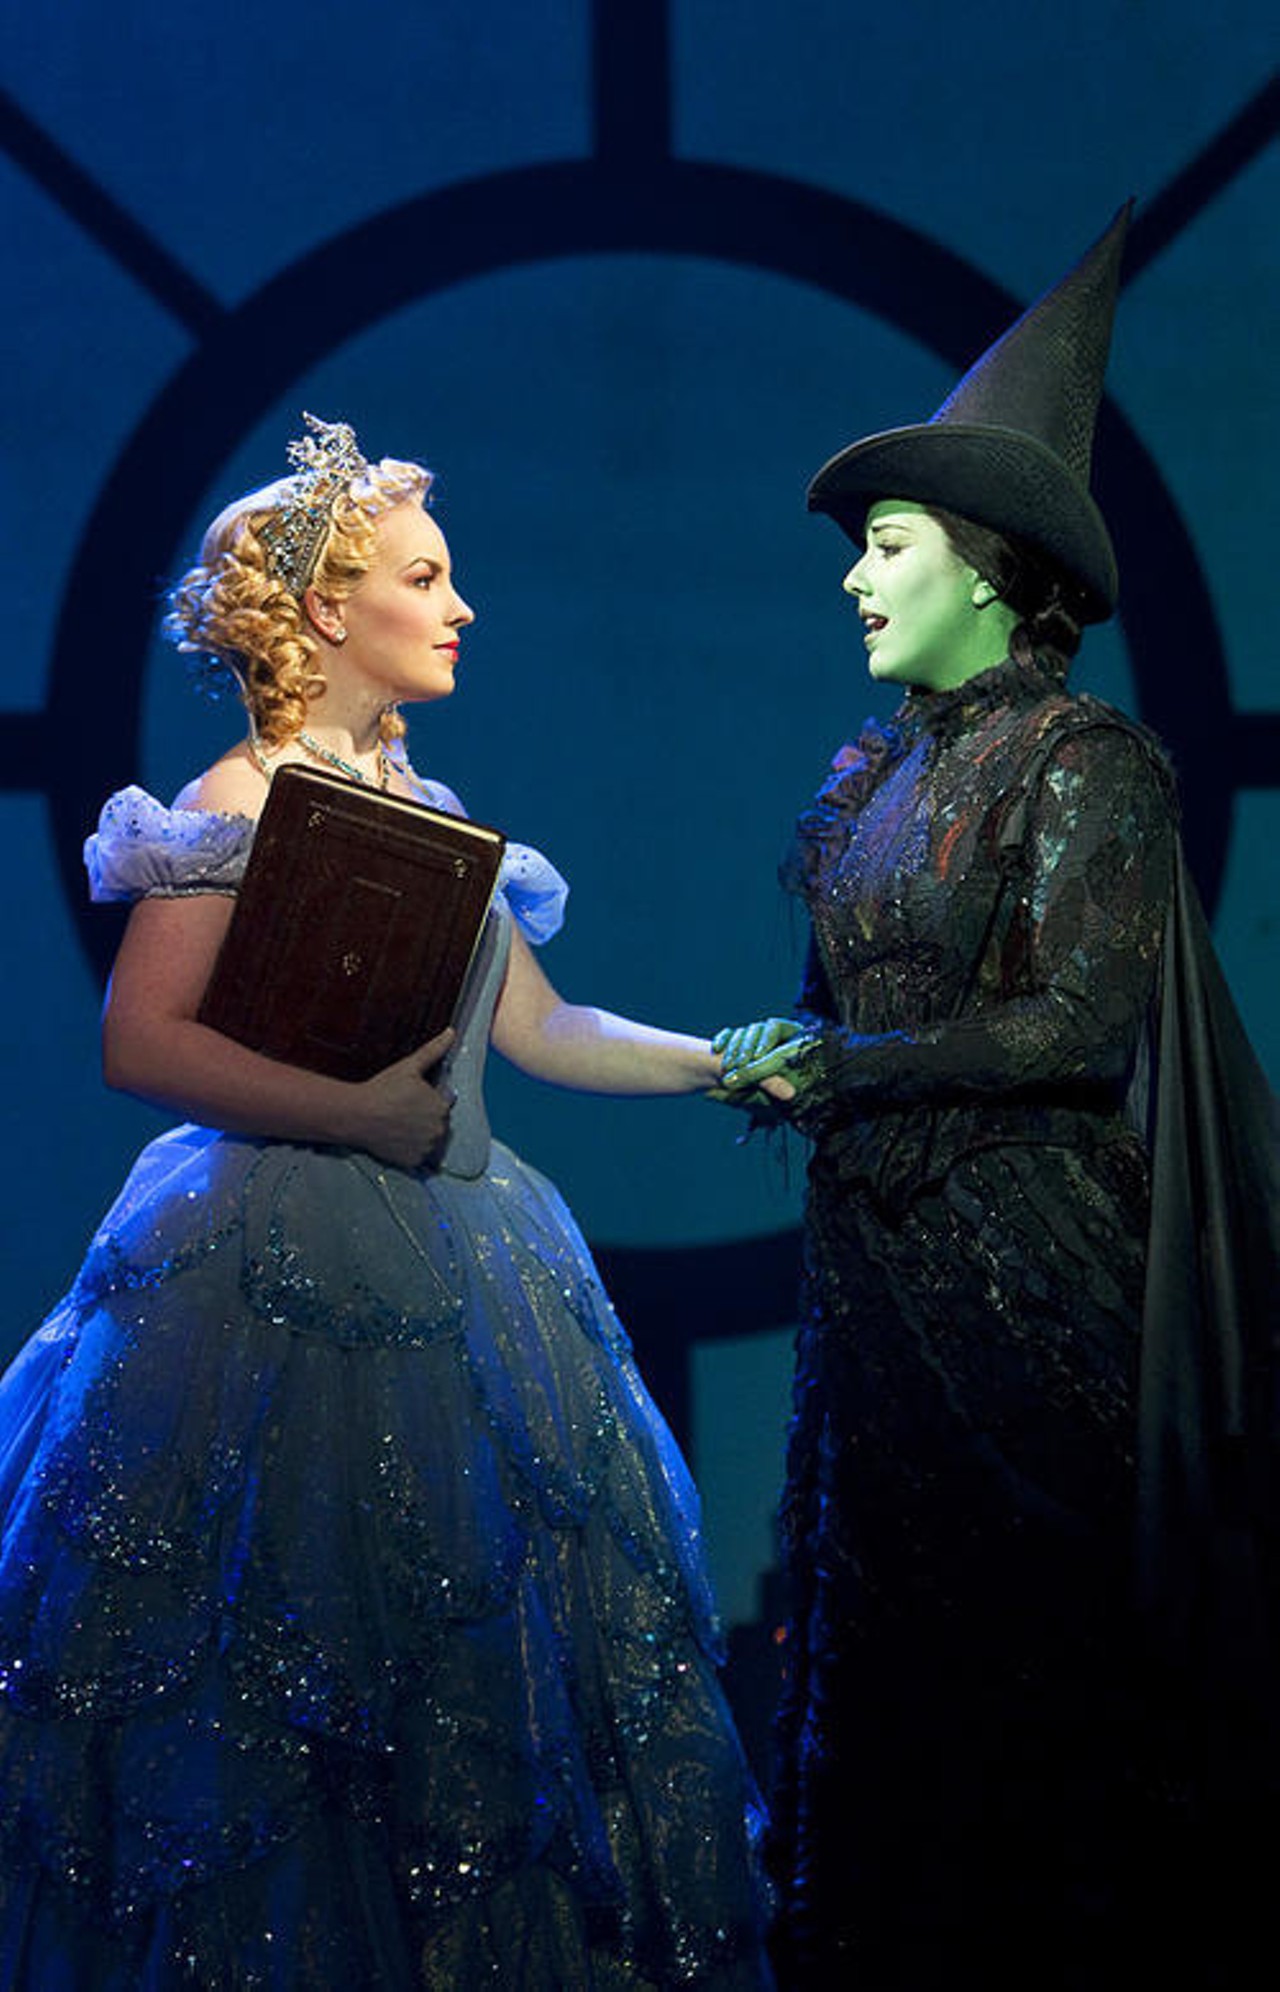 There were high-flying surprises both onstage and off at the opening-night performance of the mega-hit Wicked at the Fox. Continue reading Denis Brown's review of Wicked.